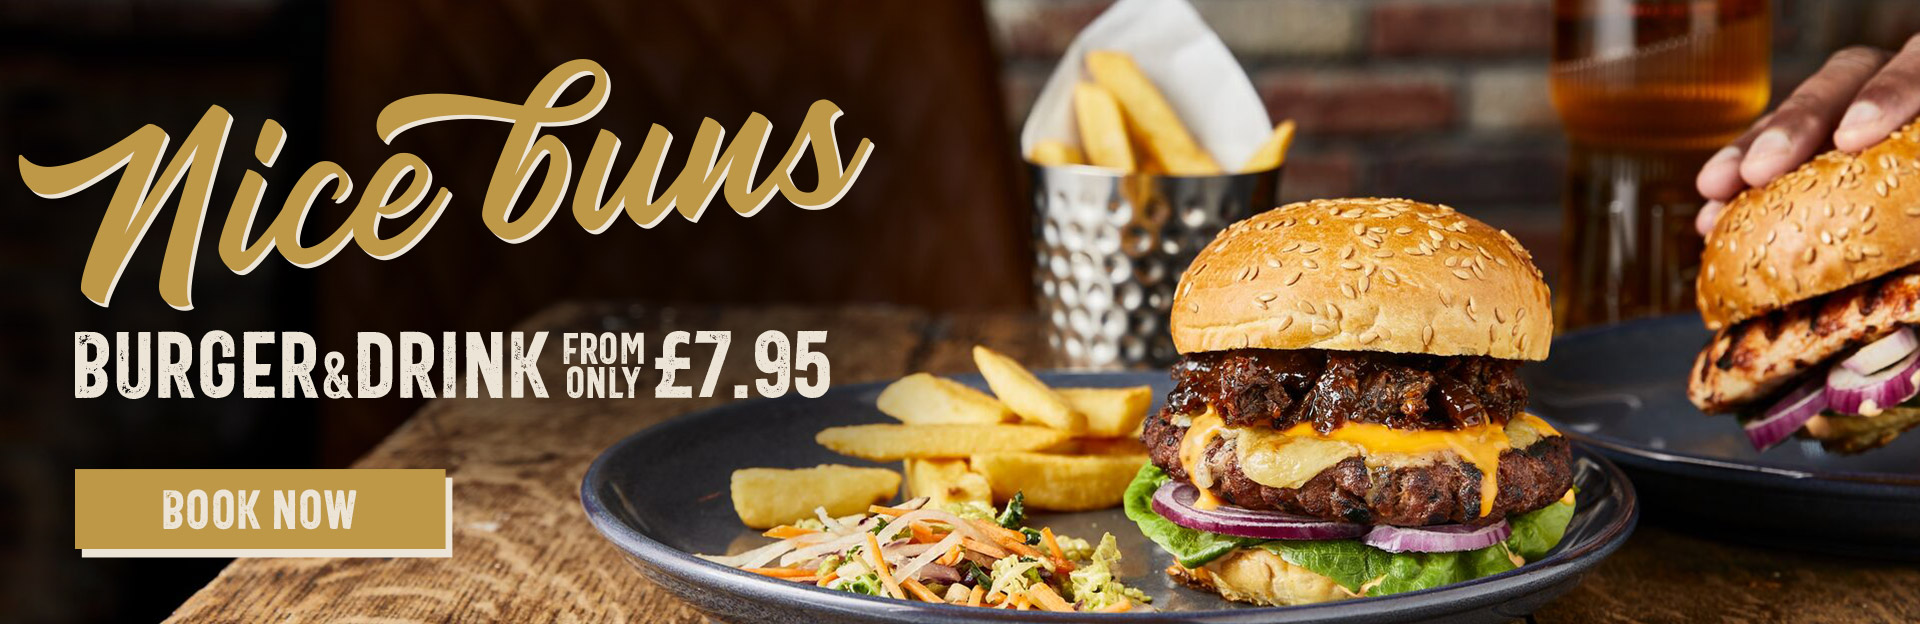 Burger & Drink at The Gardeners Arms